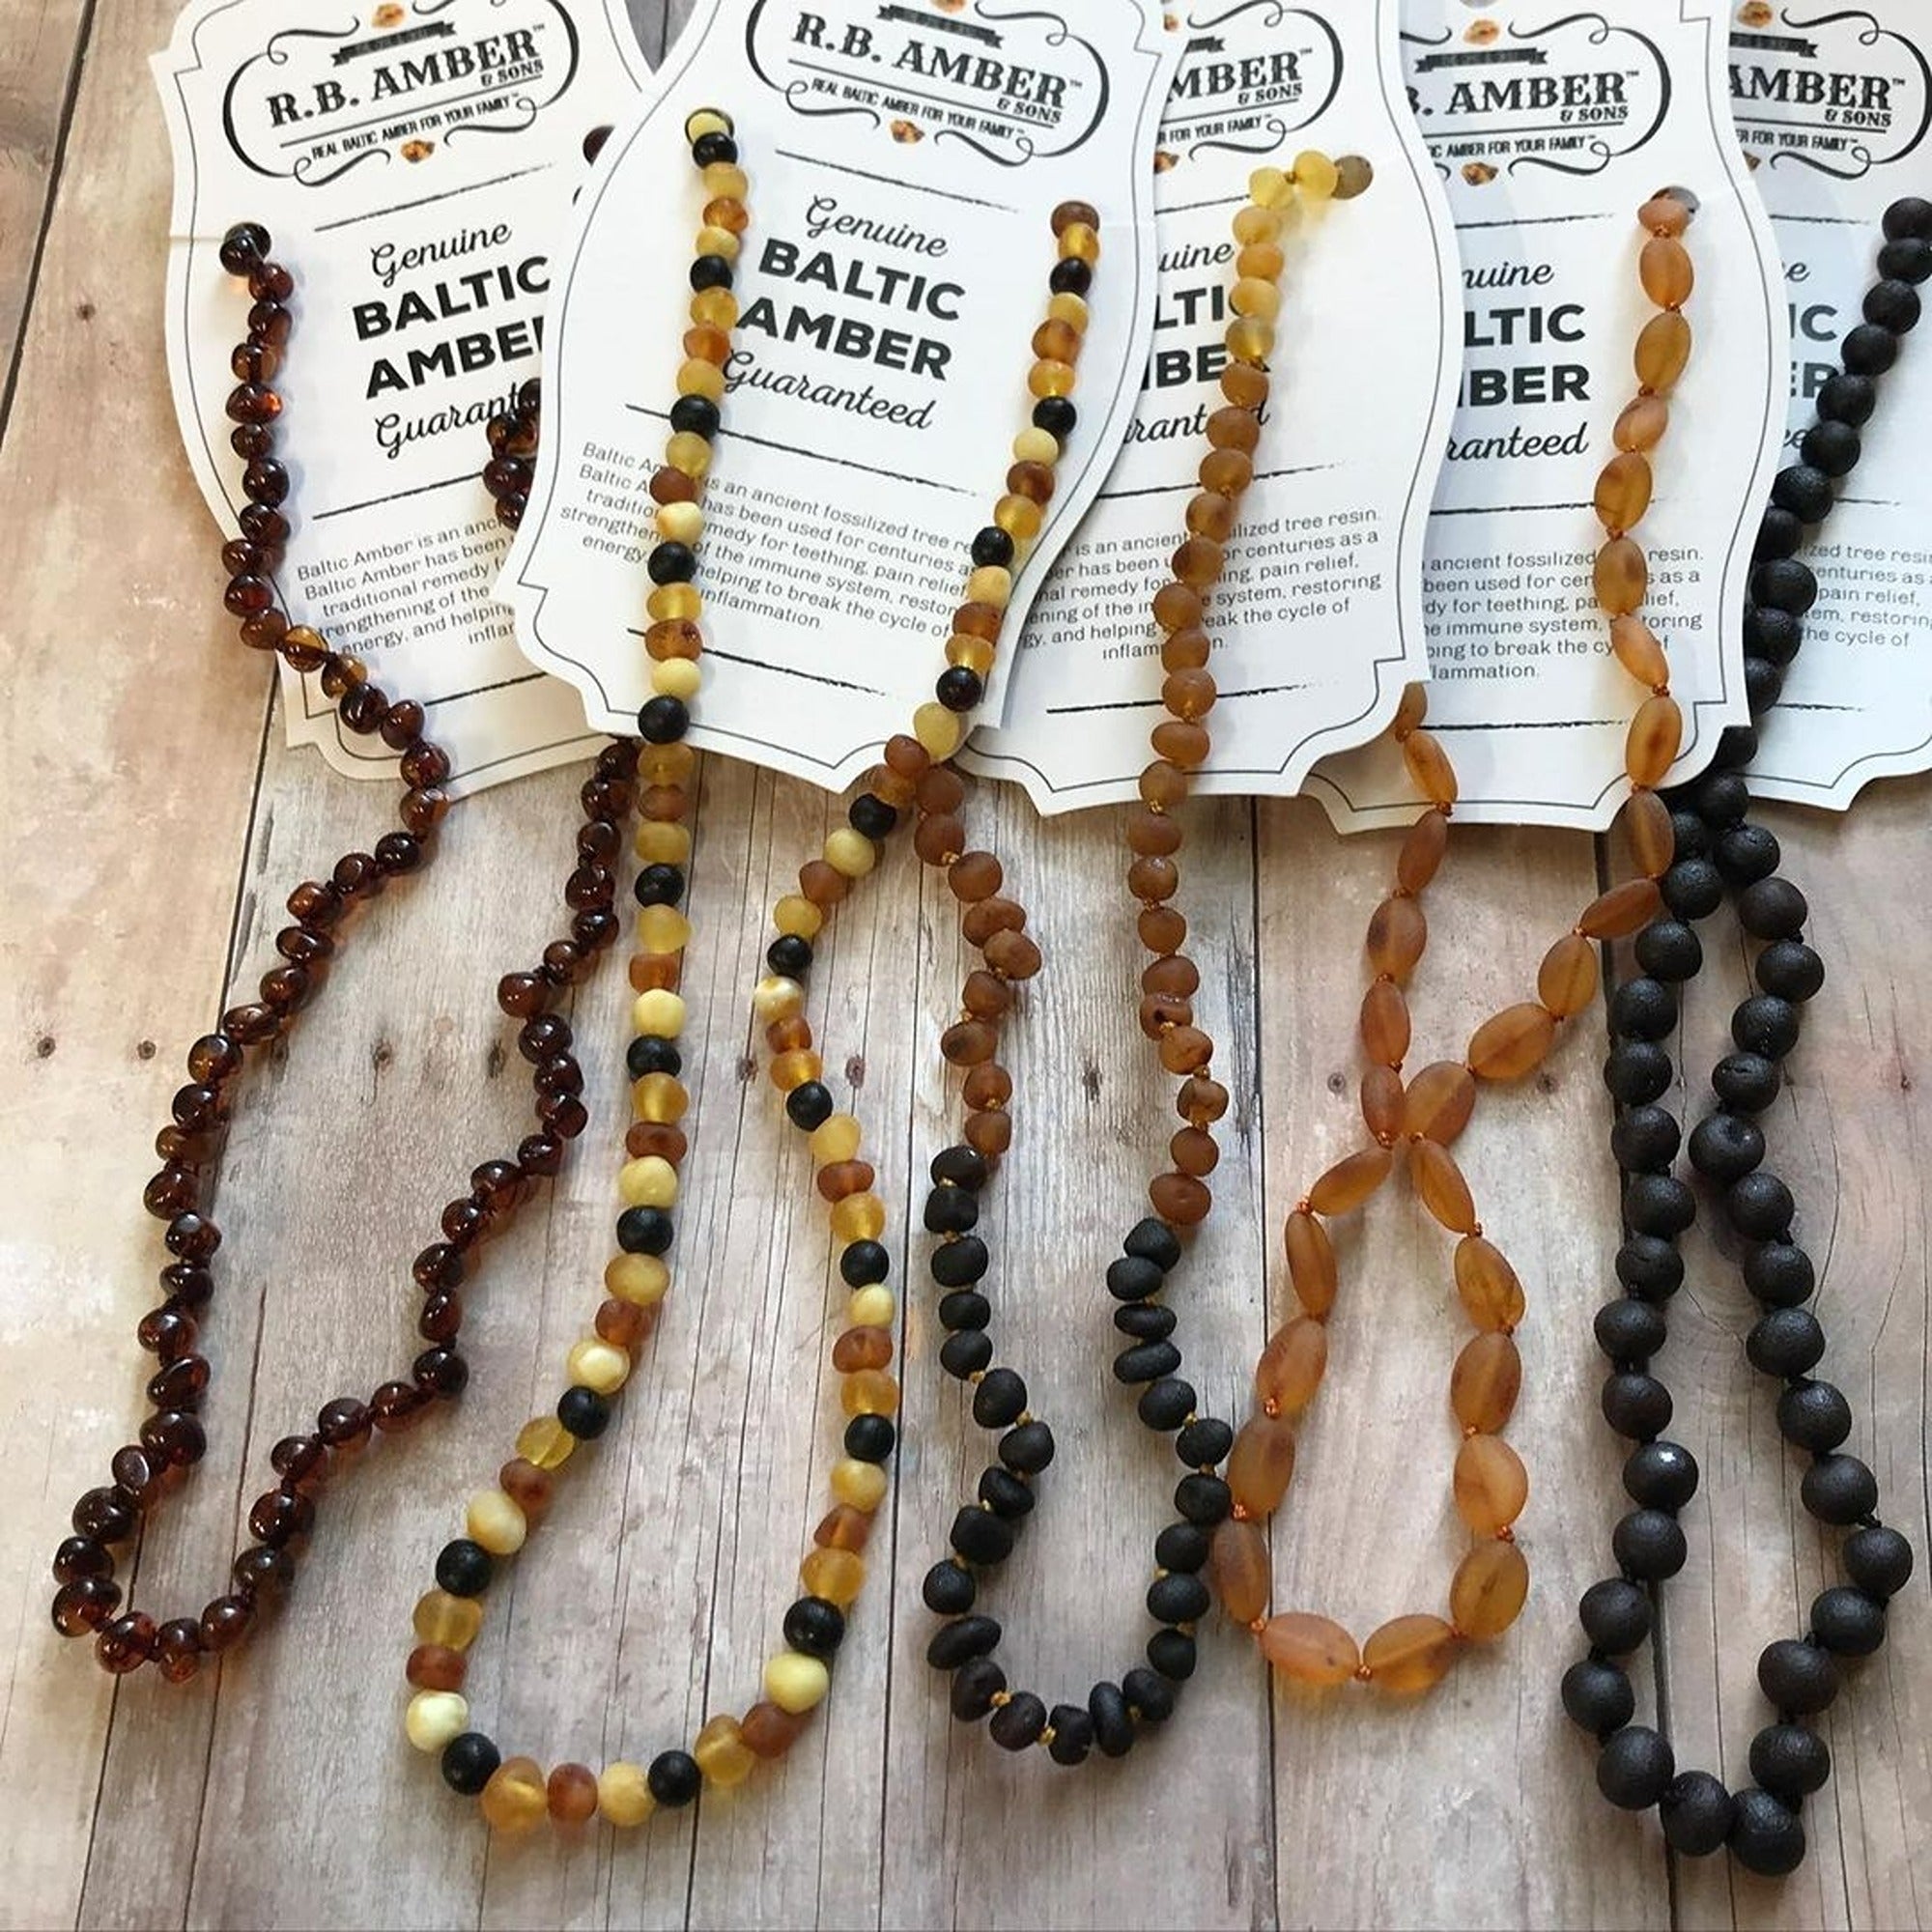 Massive Baltic Amber Necklaces. Free Form Shape Amber Necklaces.